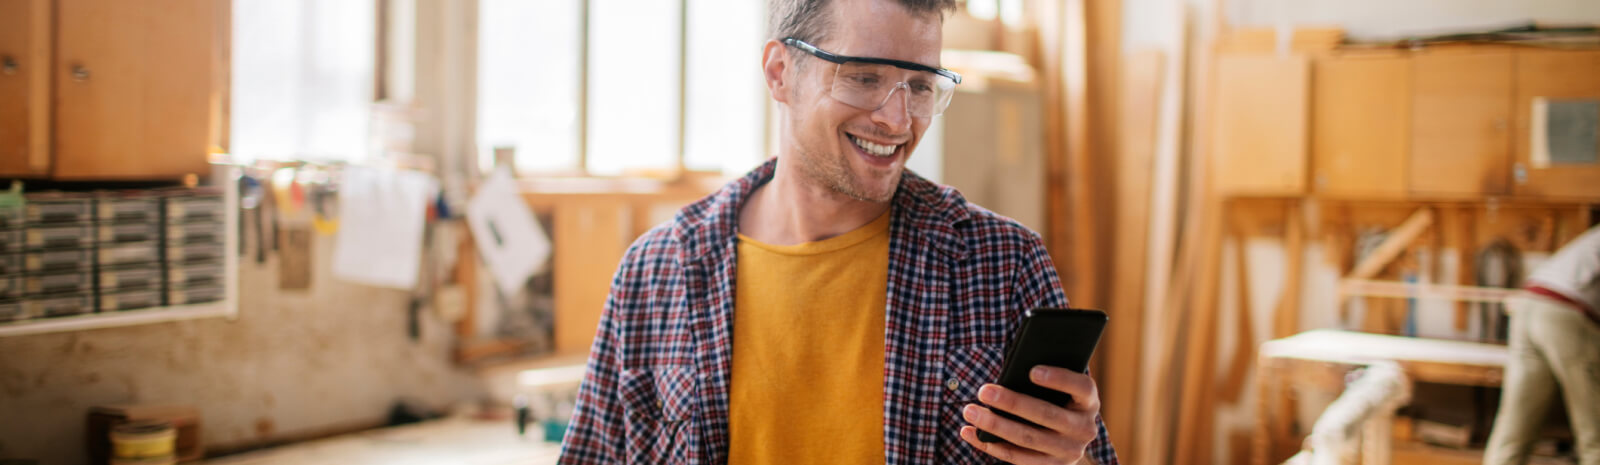 man wearing safety glasses looking at a smartphone